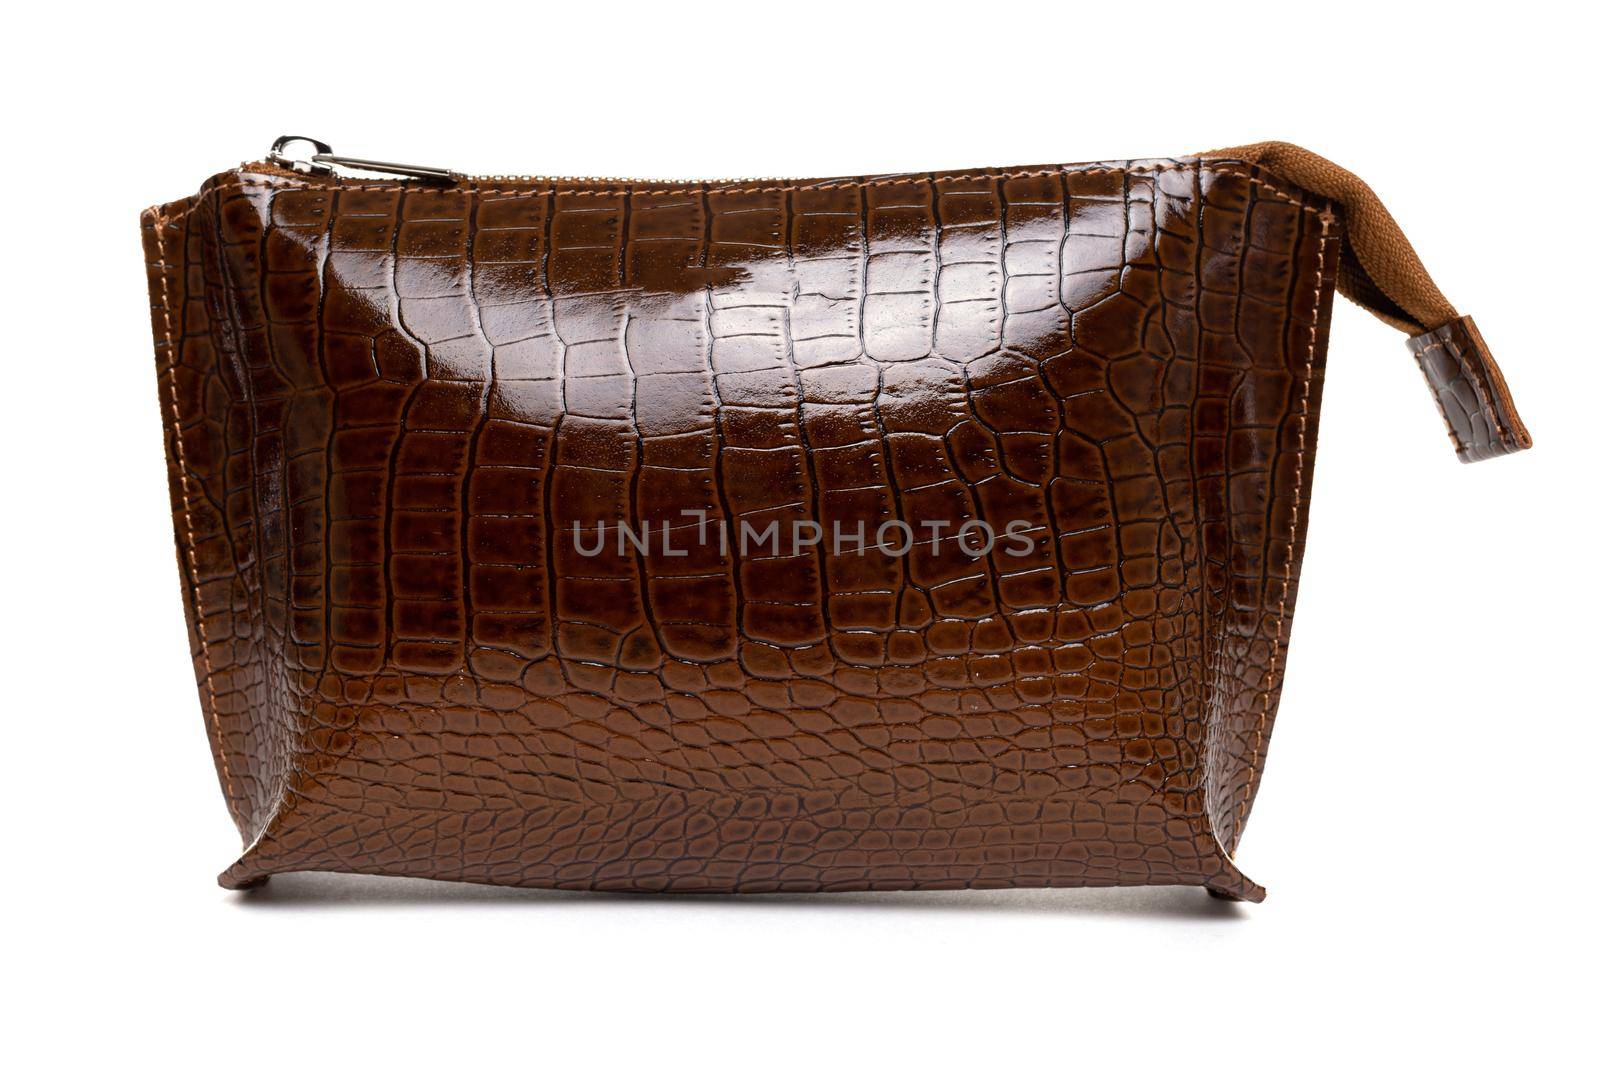 women's cosmetic bag made of genuine brown leather with imitation crocodile skin.